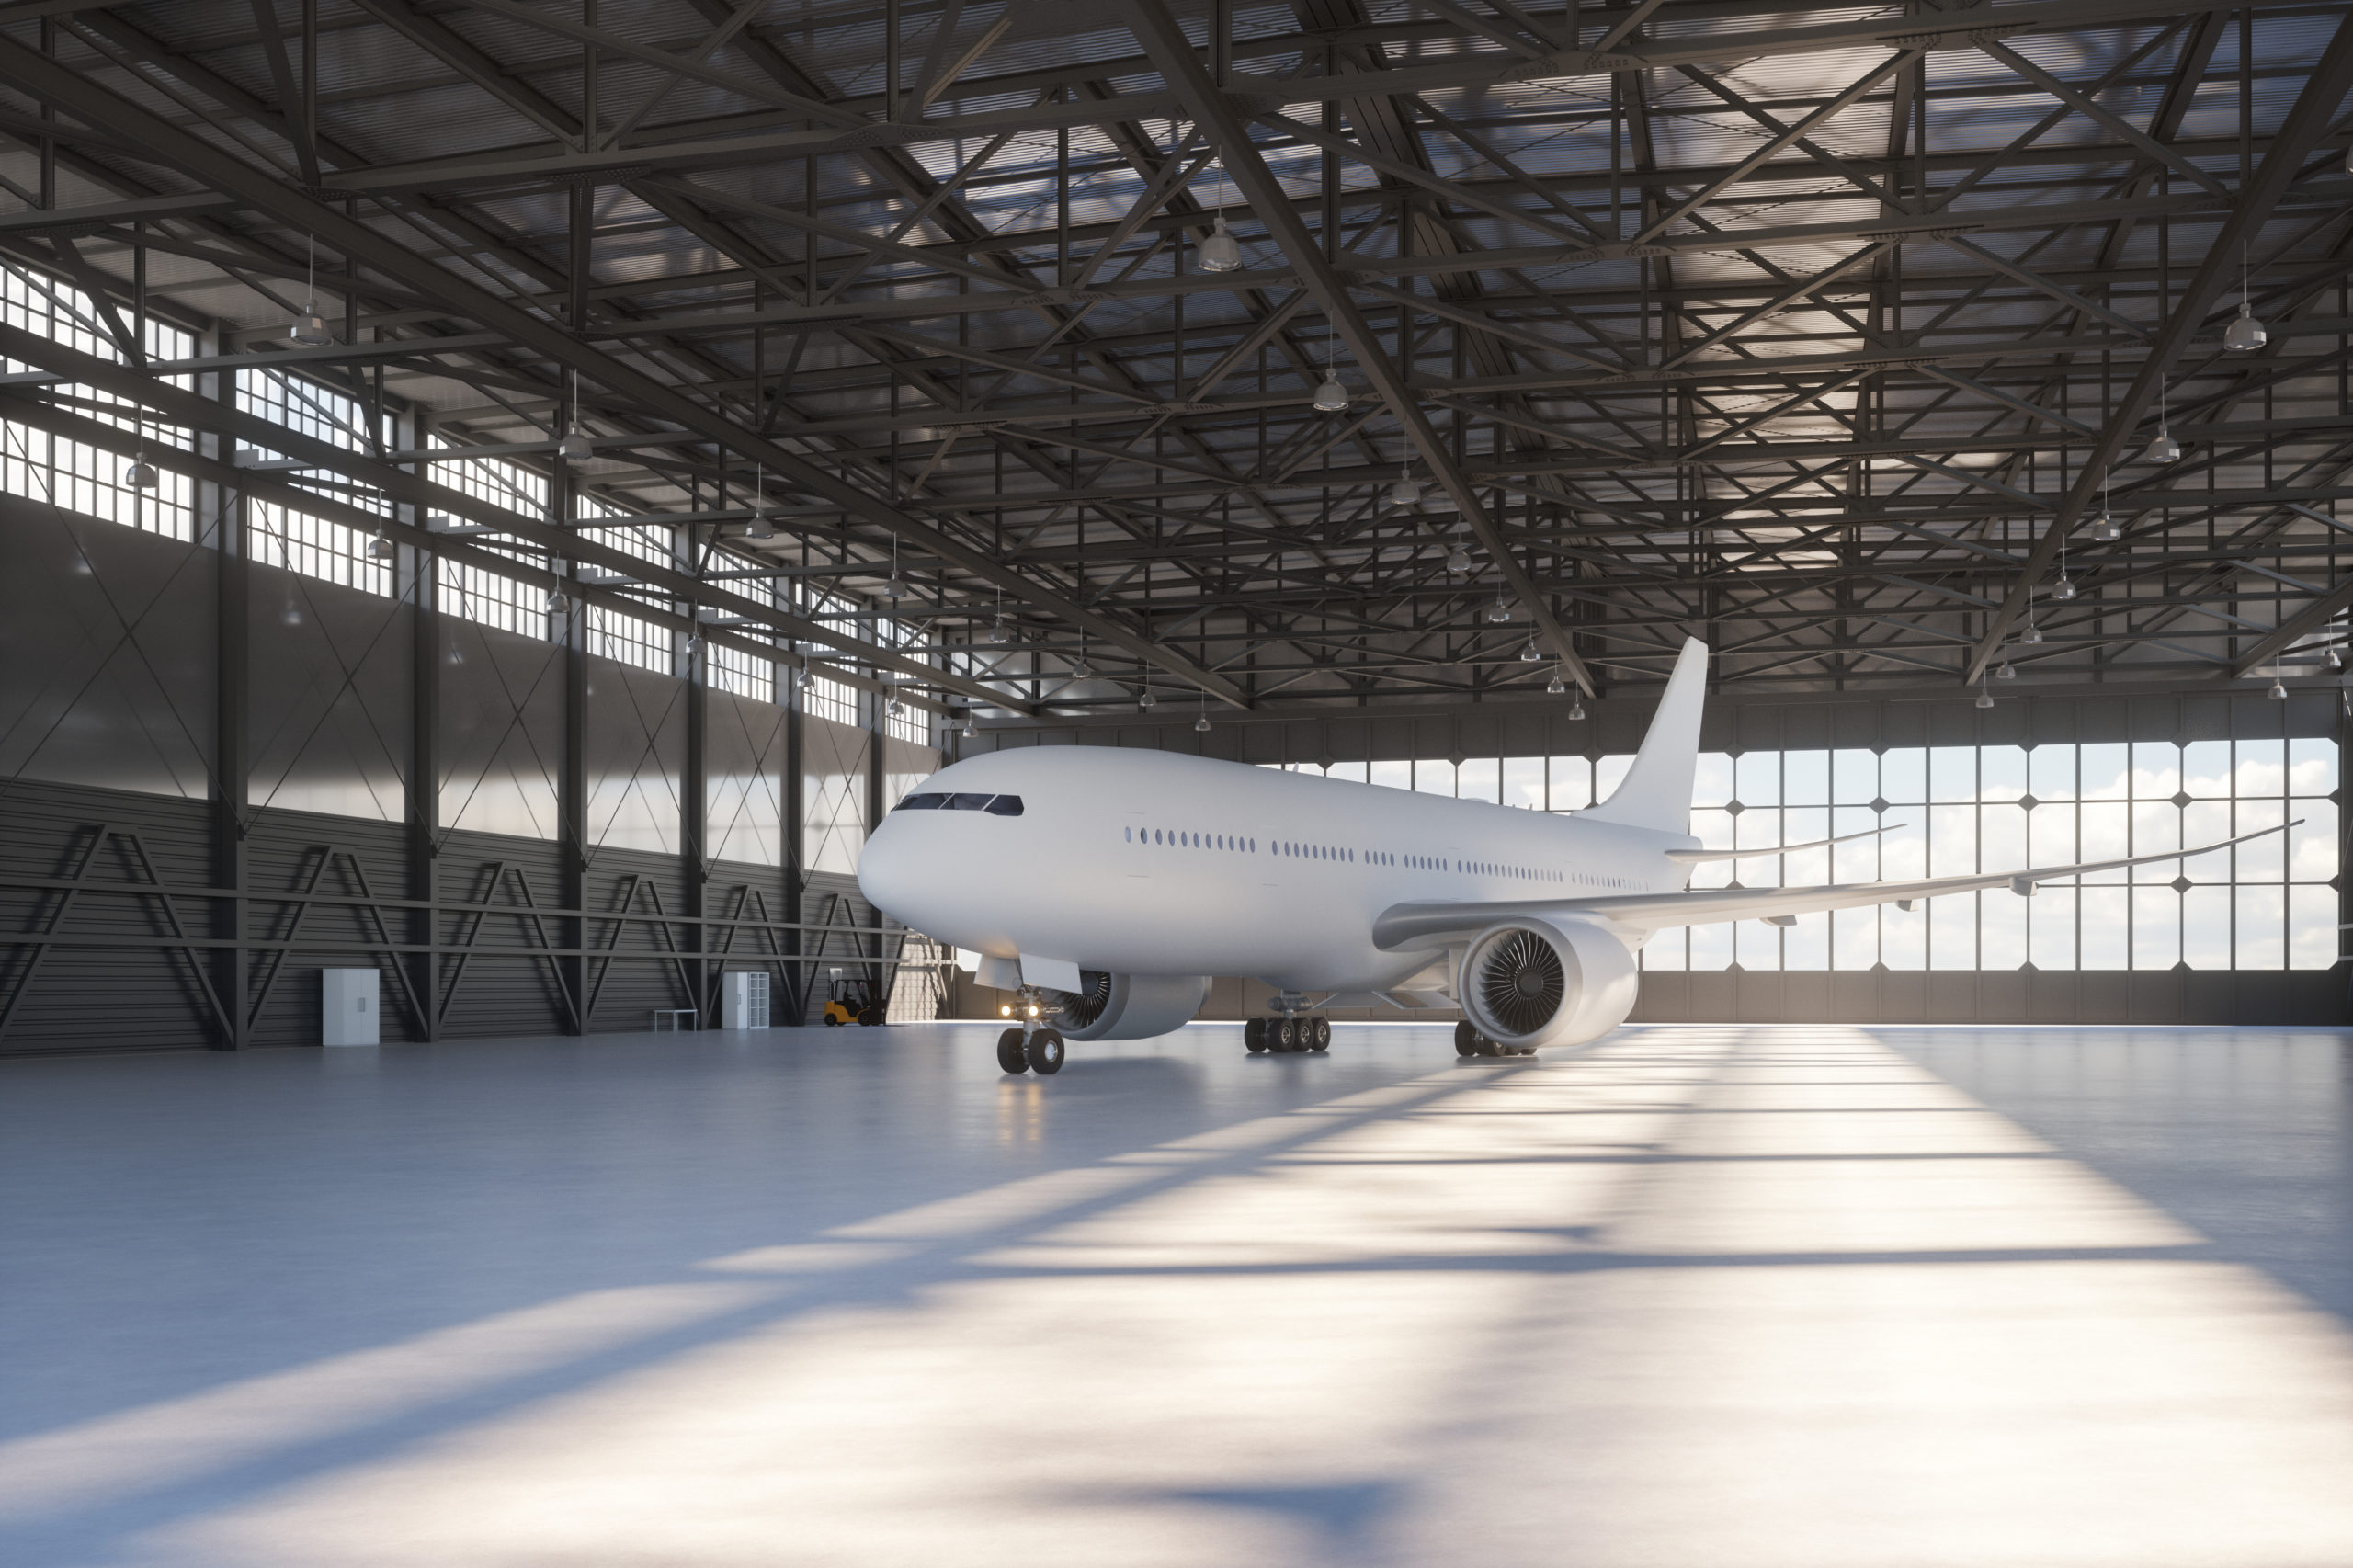 GettyImages 1209778518 scaled - REASONS TO GET AN AIRPLANE HANGAR KIT